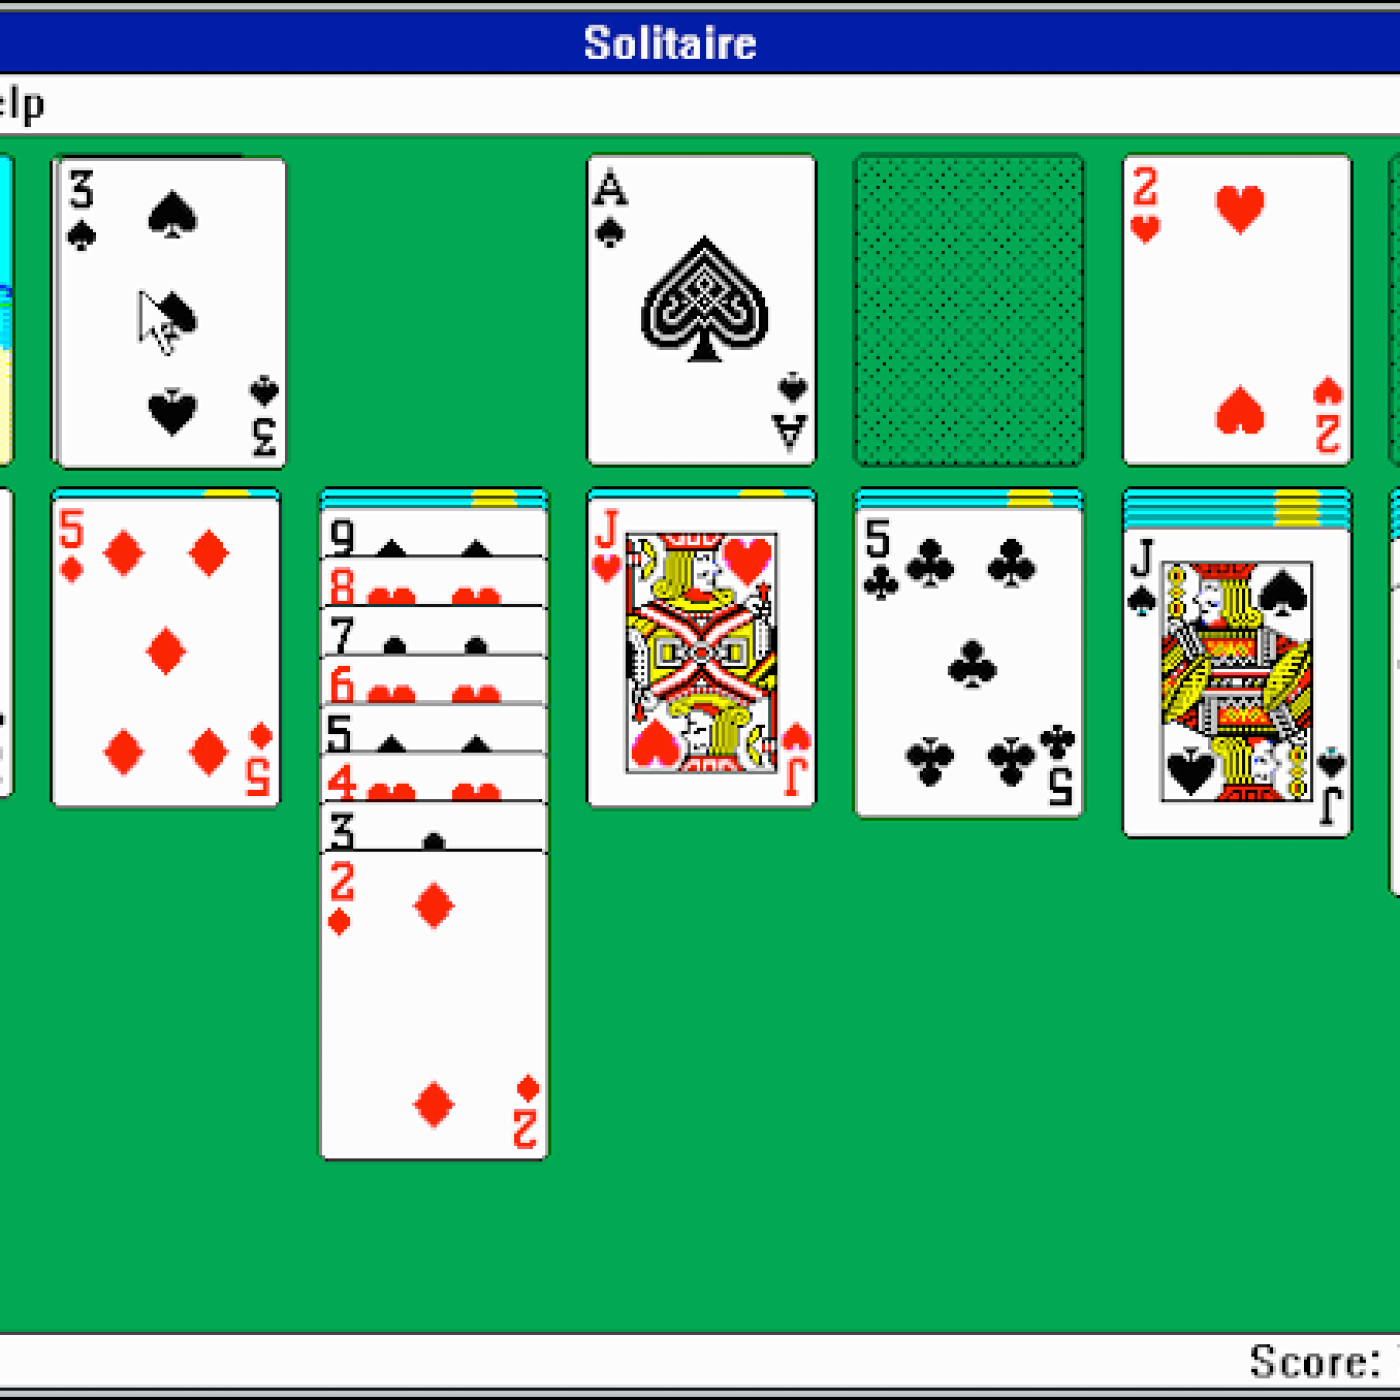 Download: Microsoft Solitaire Collection for iPhone, iPad, Android